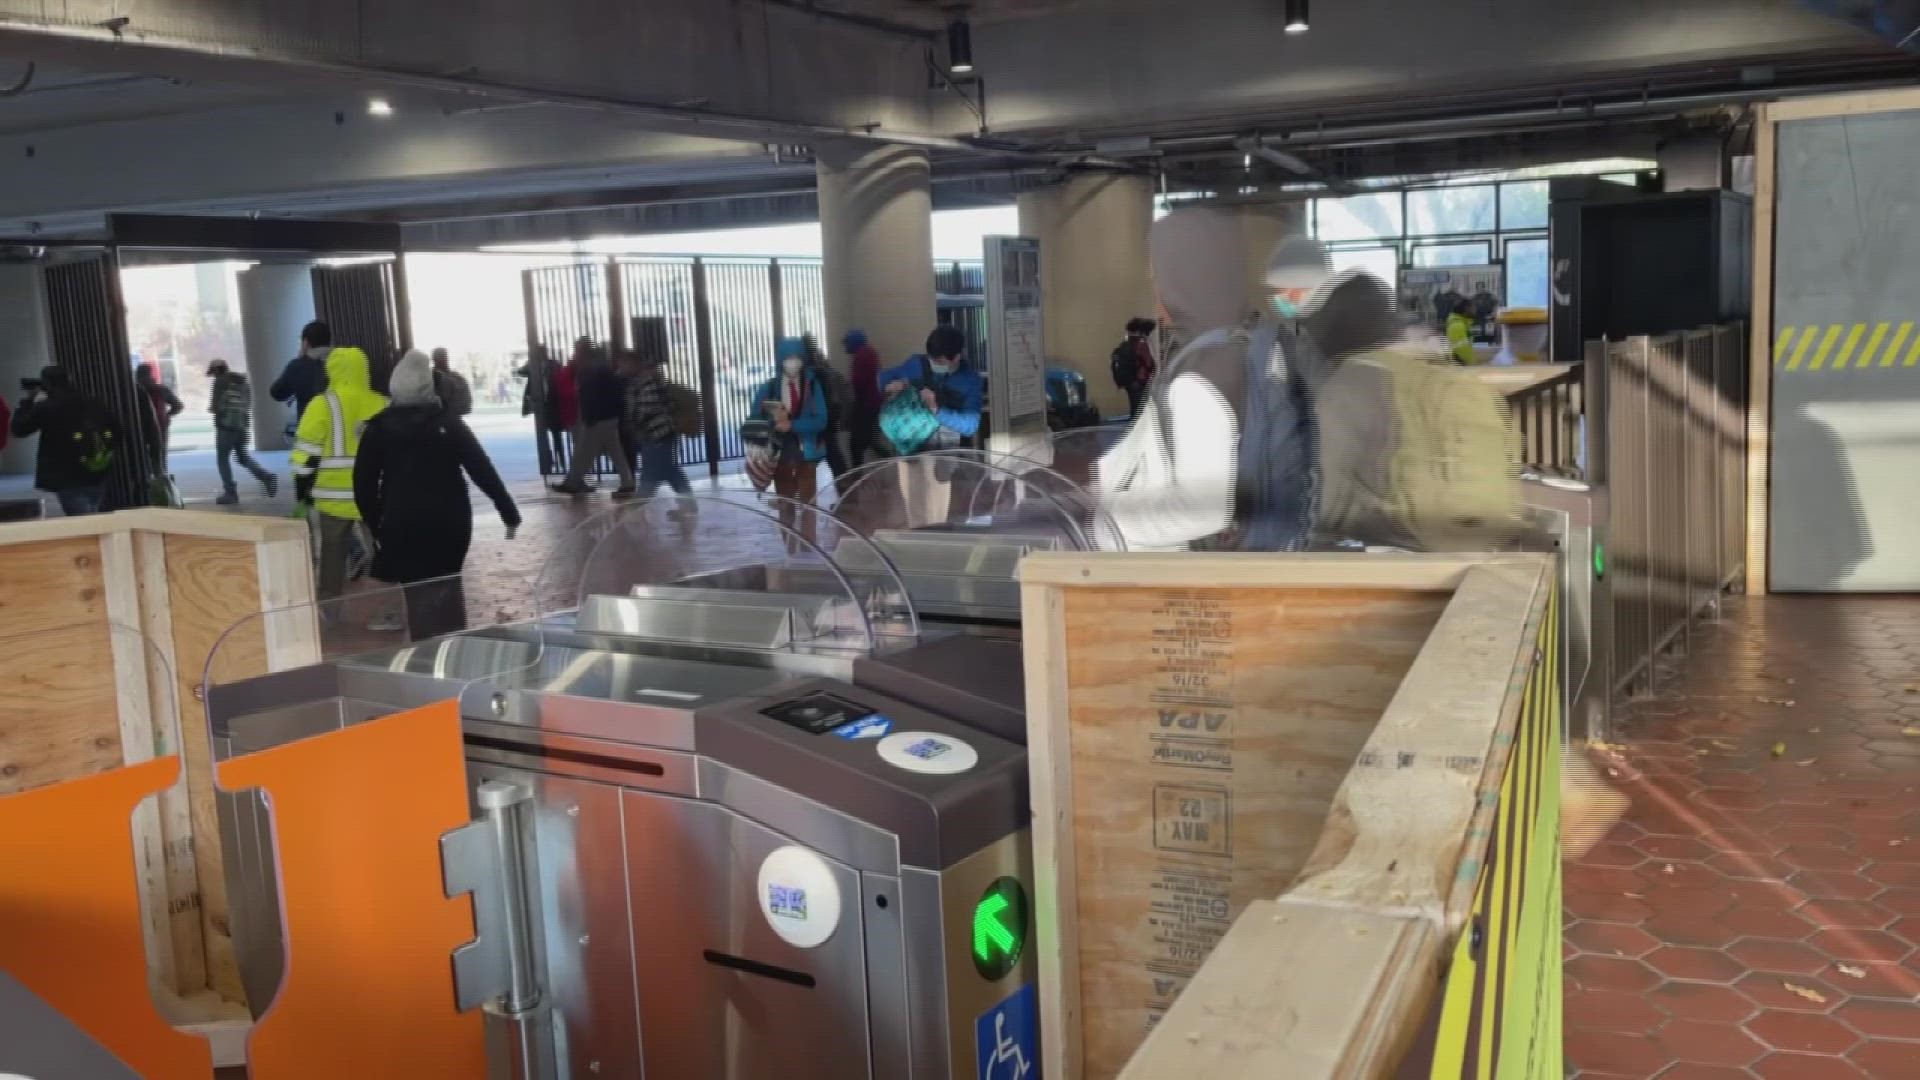 Regardless of a prototype aiming to curb fare evasion, WUSA9 captured footage of several people appearing to step over the faregates.